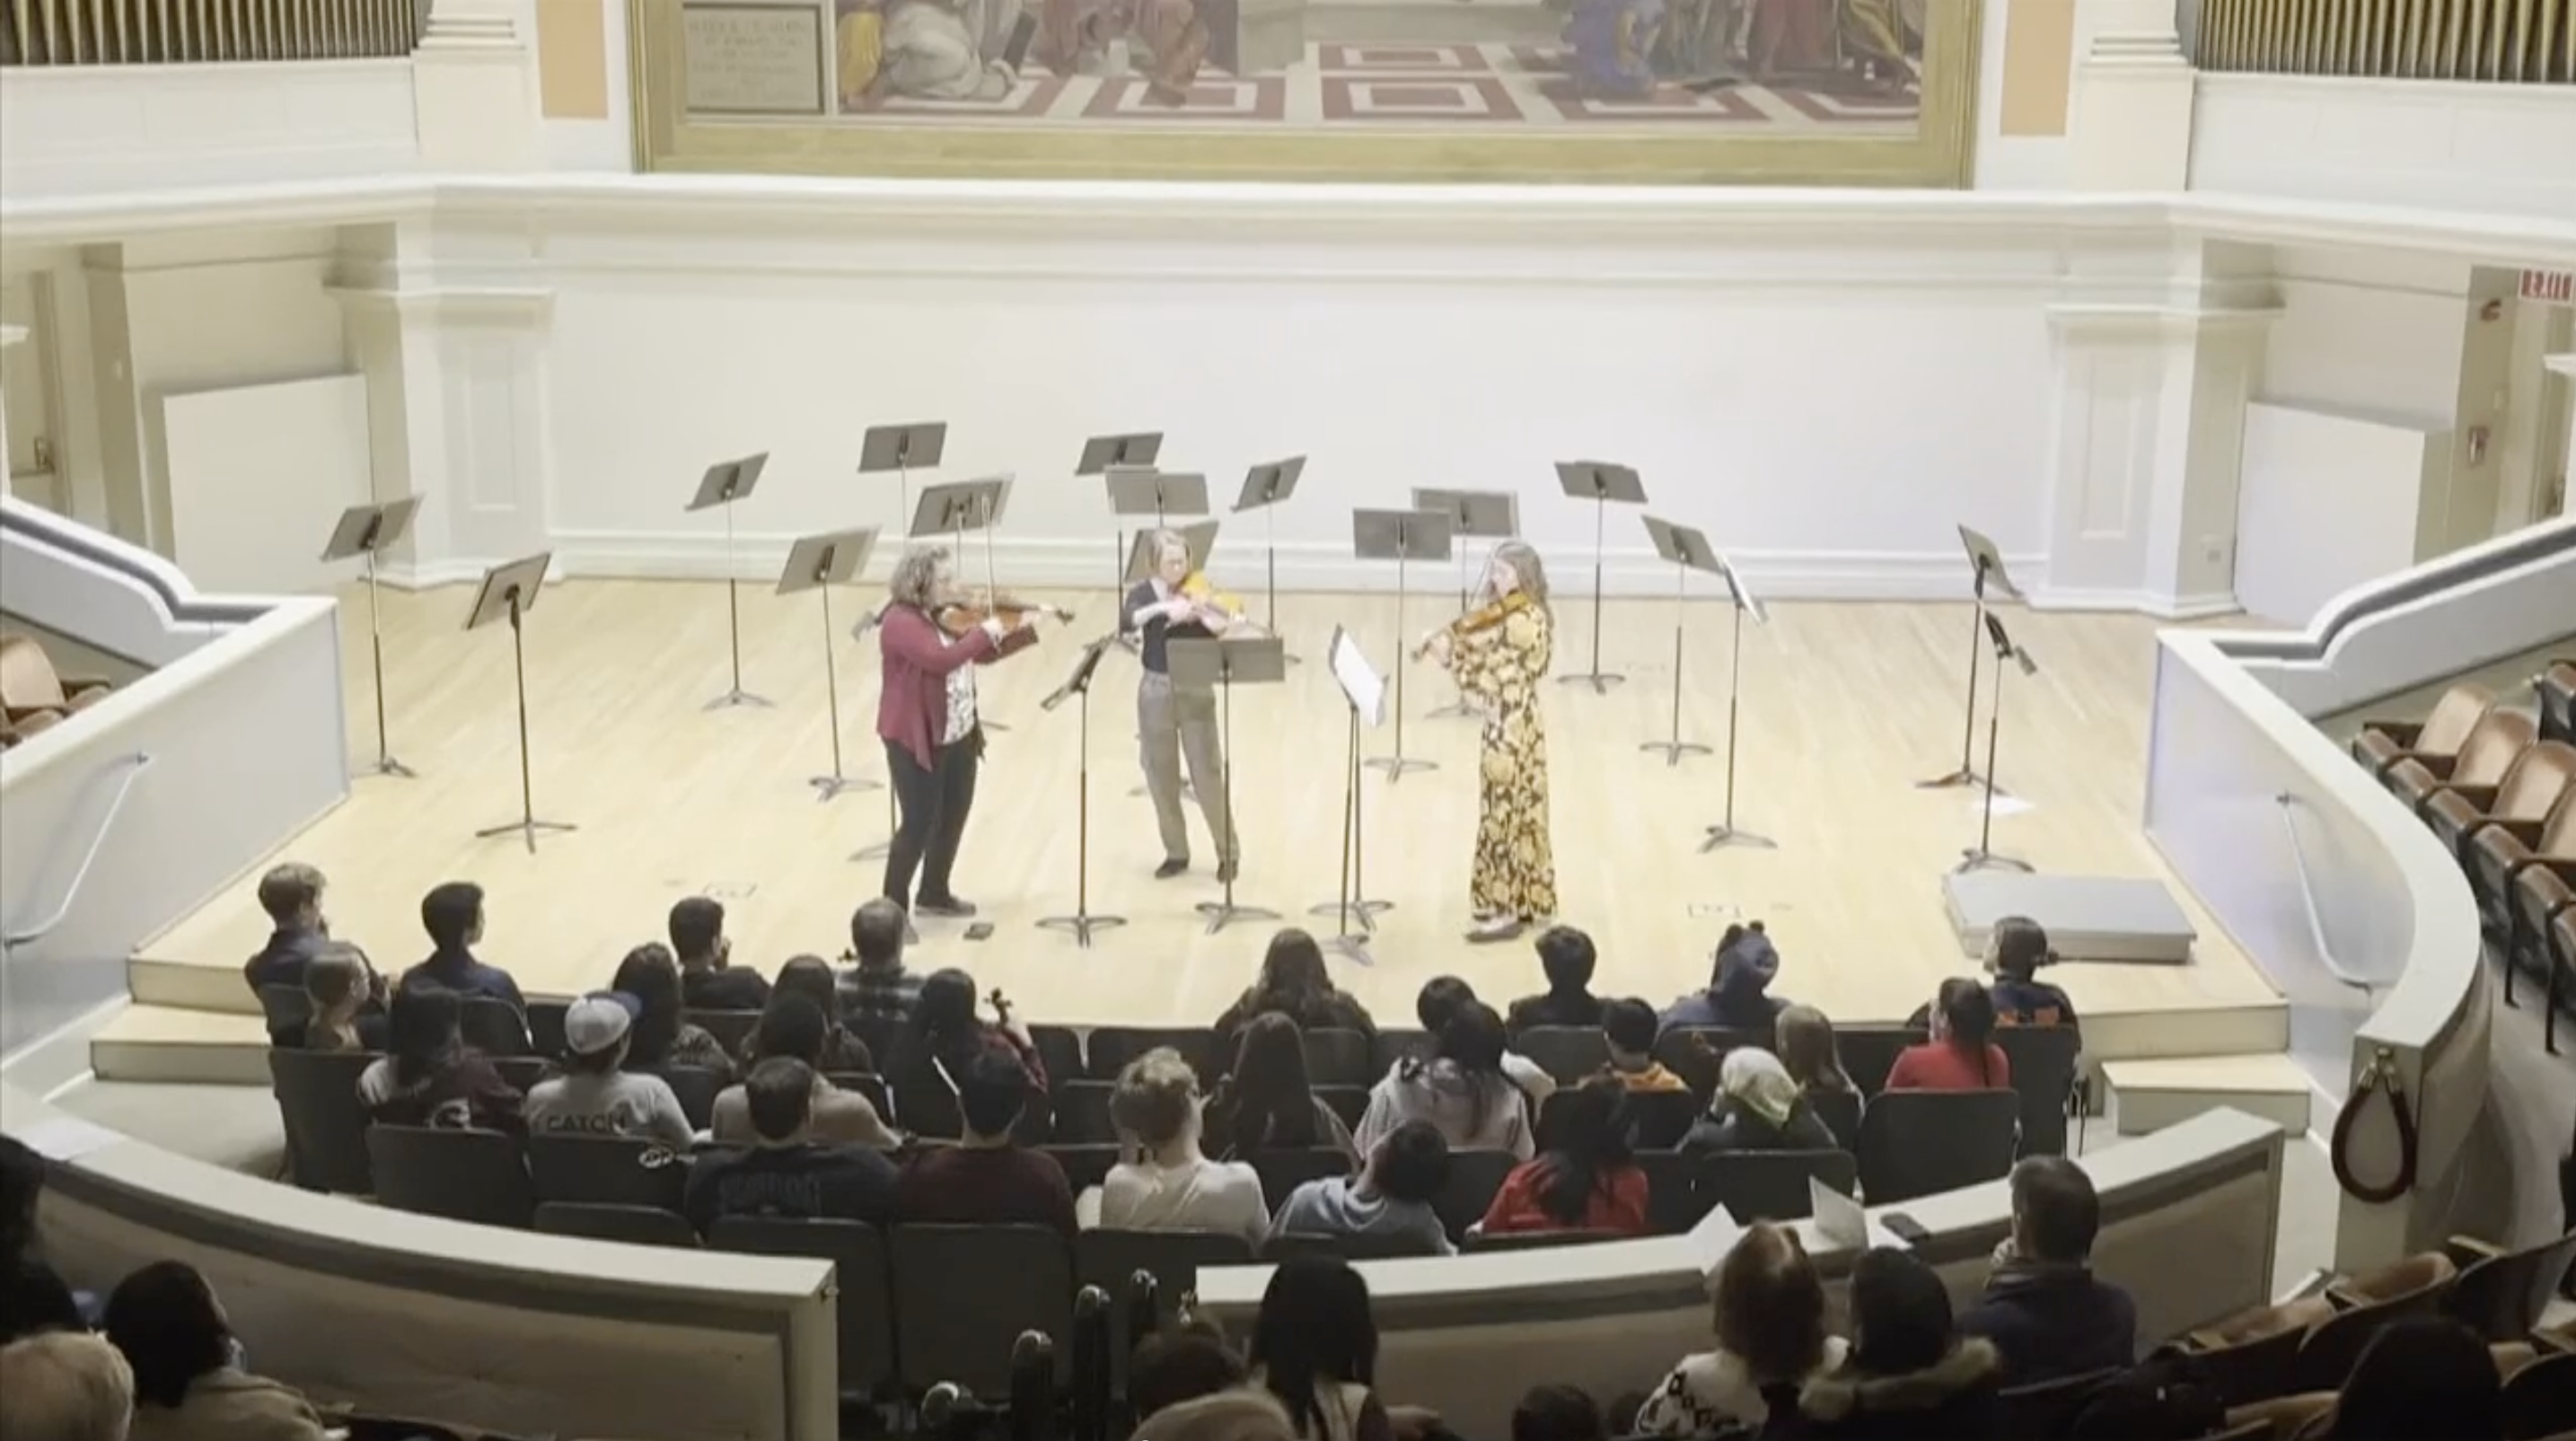 3 violists stand on the stage in Old Cabell Hall and play the viola to an audience.